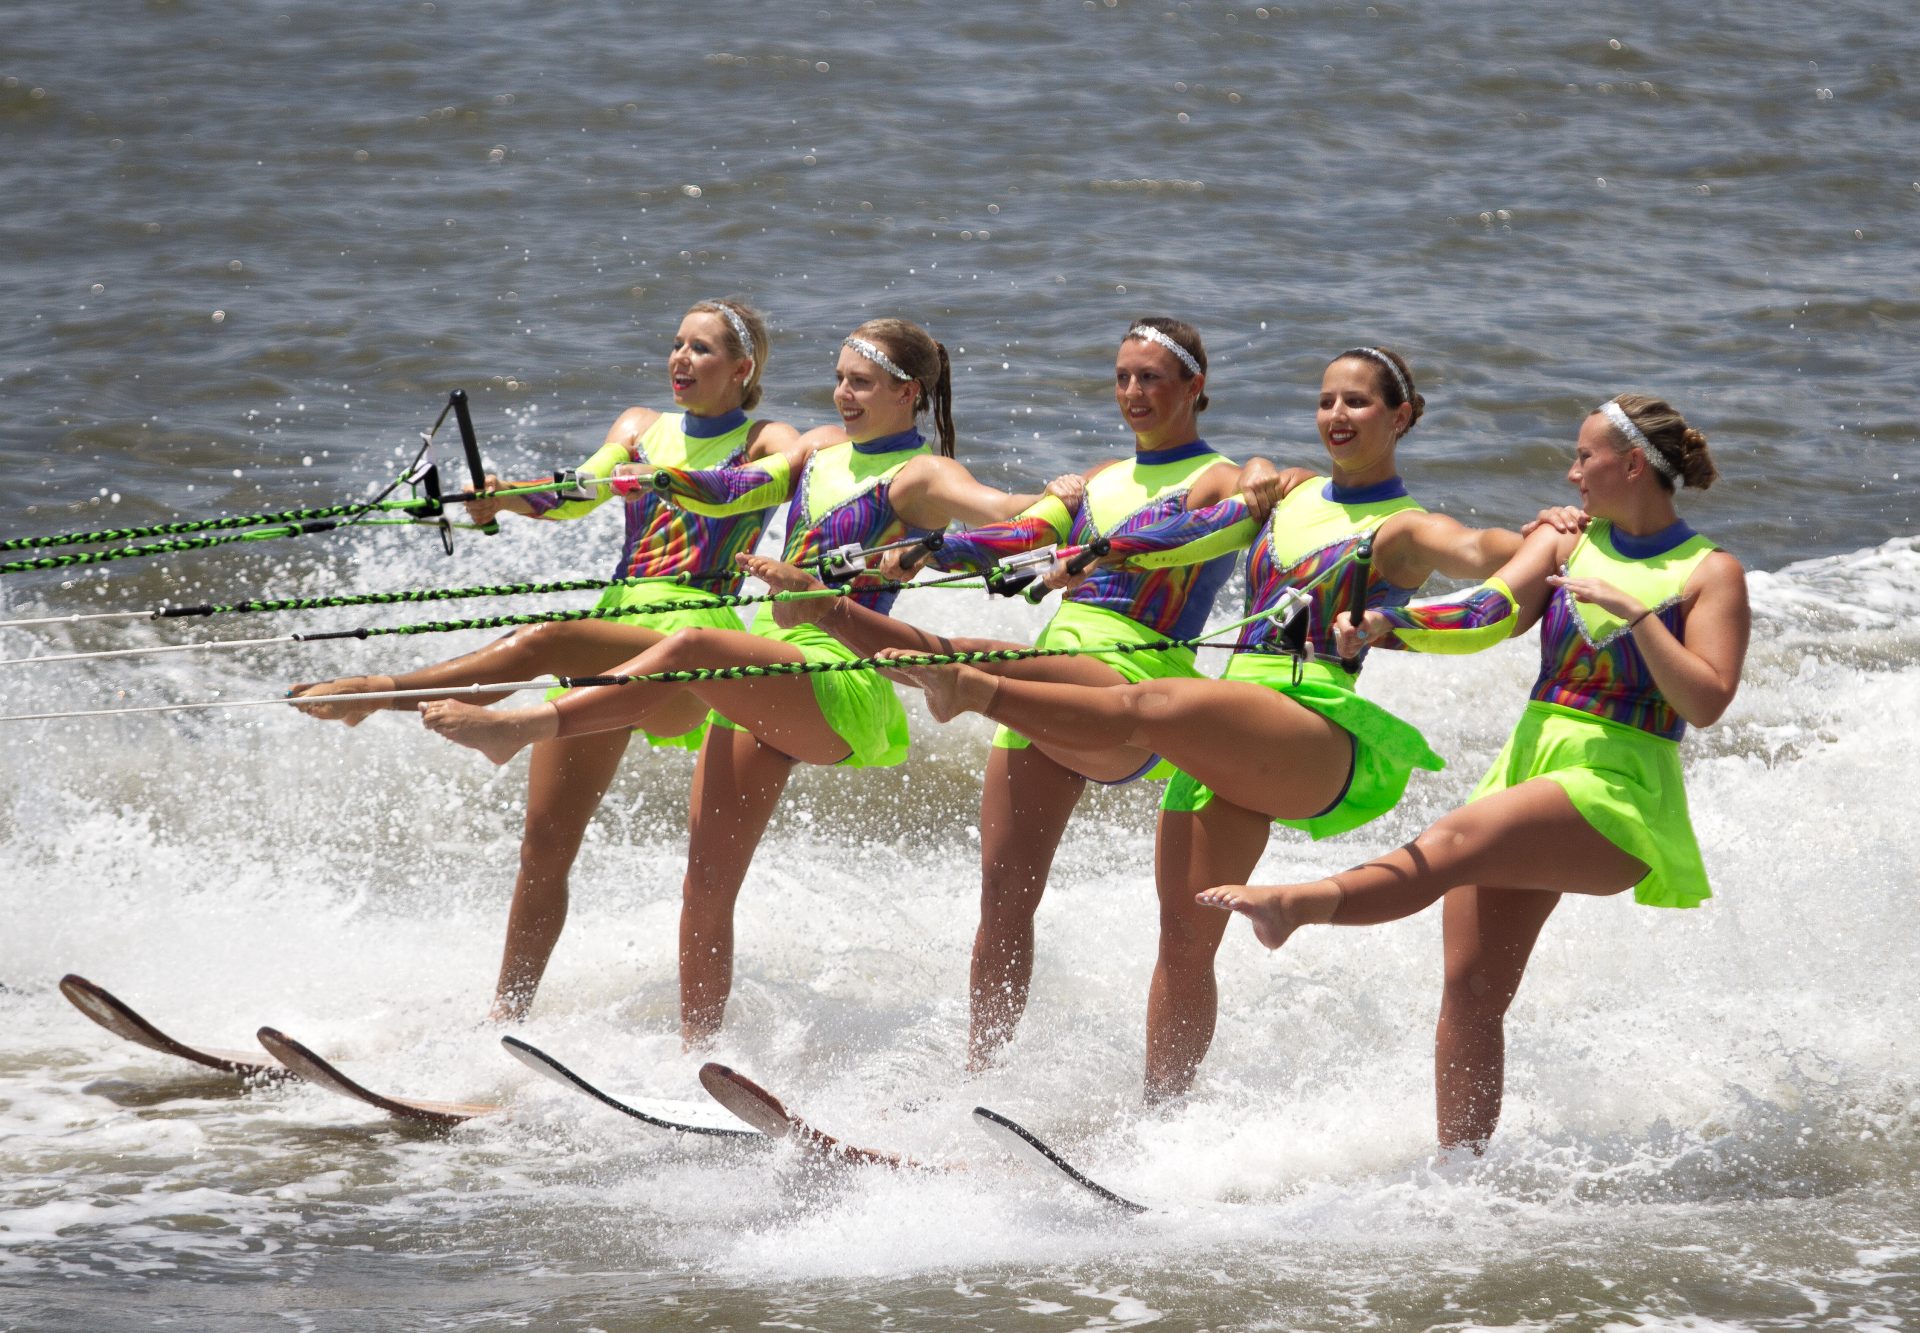 Performers from Gatorland Water Ski Show Team perform during the Ski Show on Sunday, July 16, 2023, on the Beaufort River near Henry C. Chambers Waterfront Park in Beaufort as part of the 67th Annual Beaufort Water Festival. Delayna Earley/The Island News